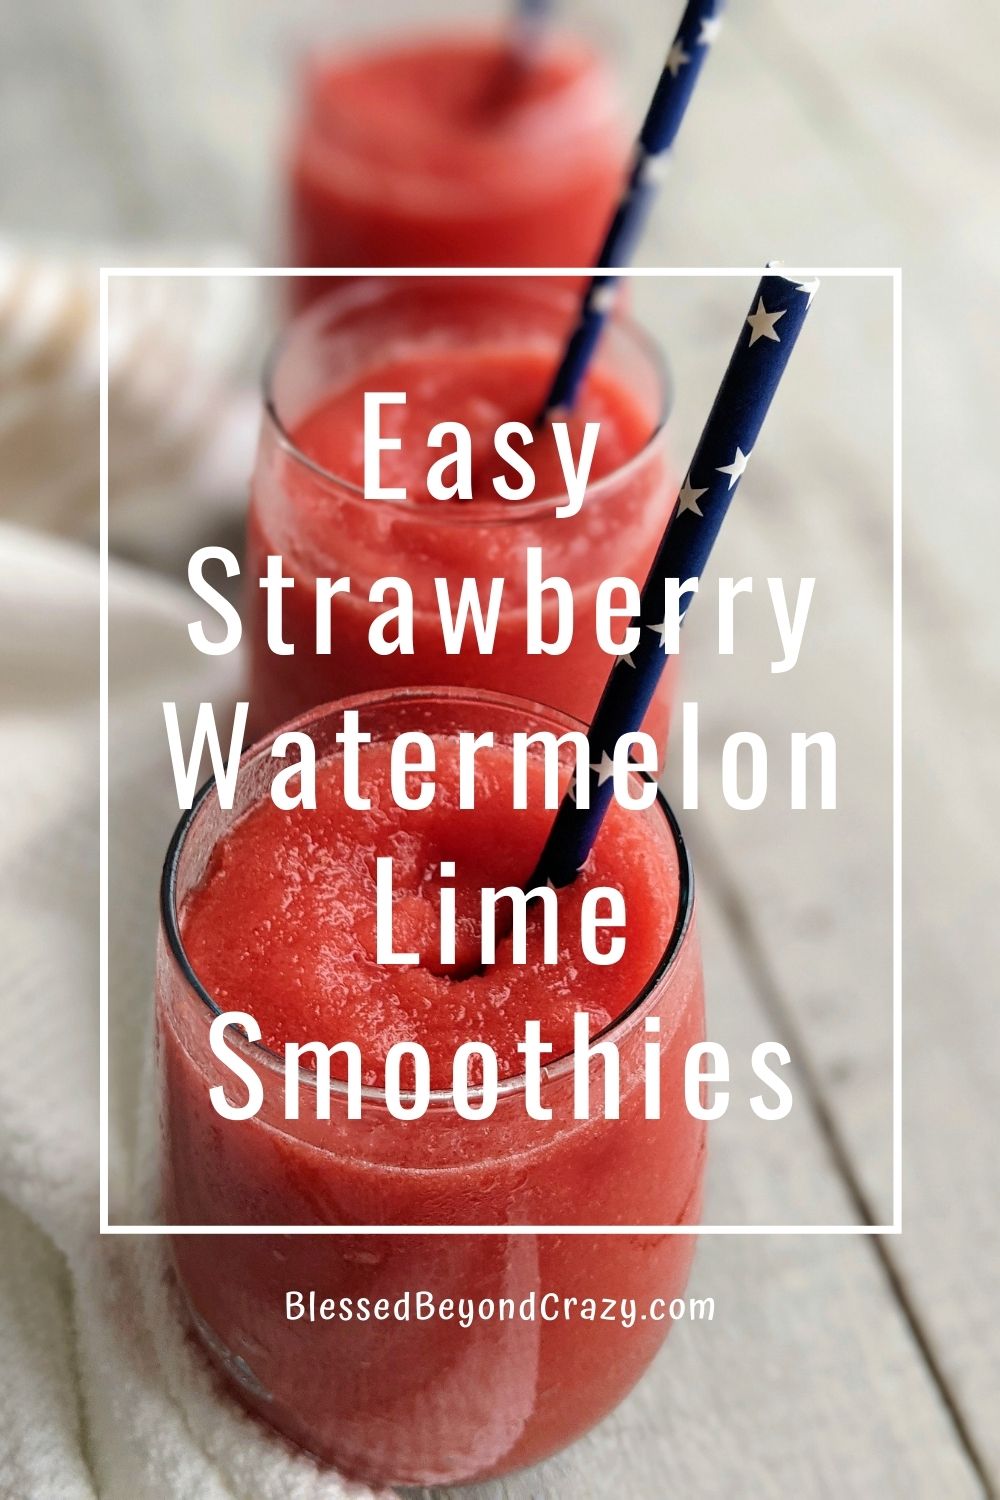 Easy Strawberry Watermelon Lime Smoothies - Blessed Beyond Crazy